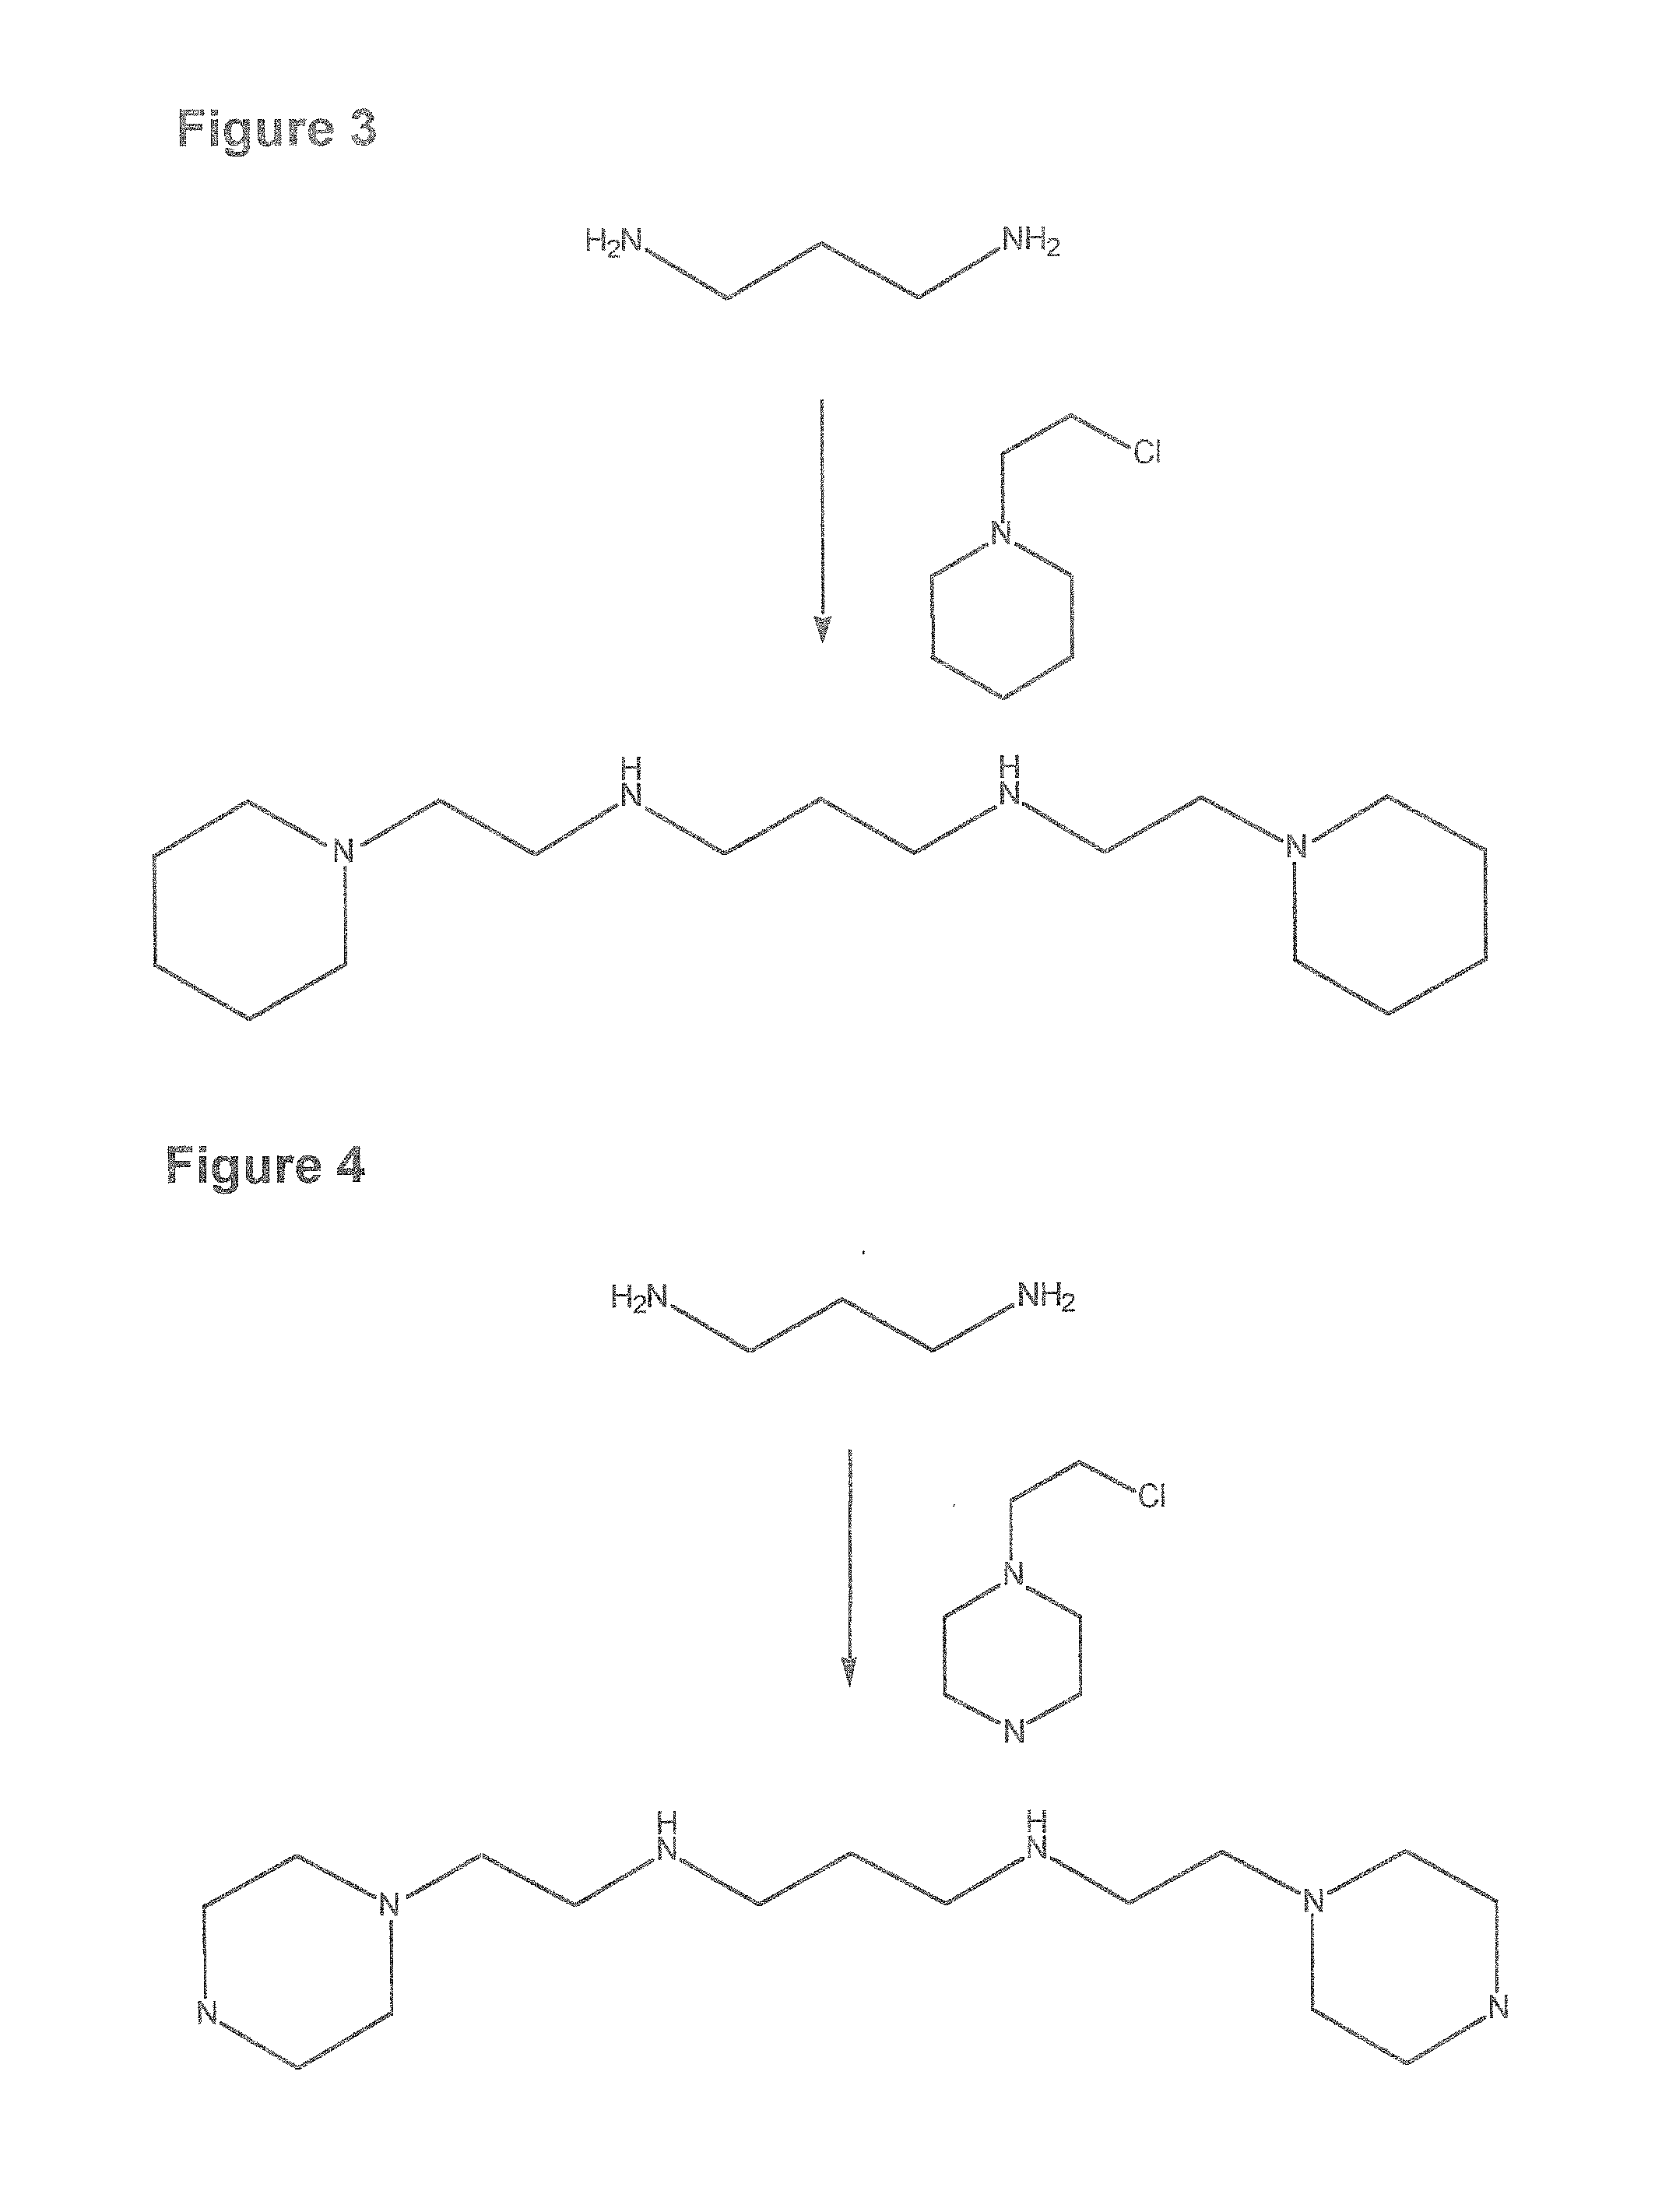 Therapeutic polyamine compositions and their synthesis